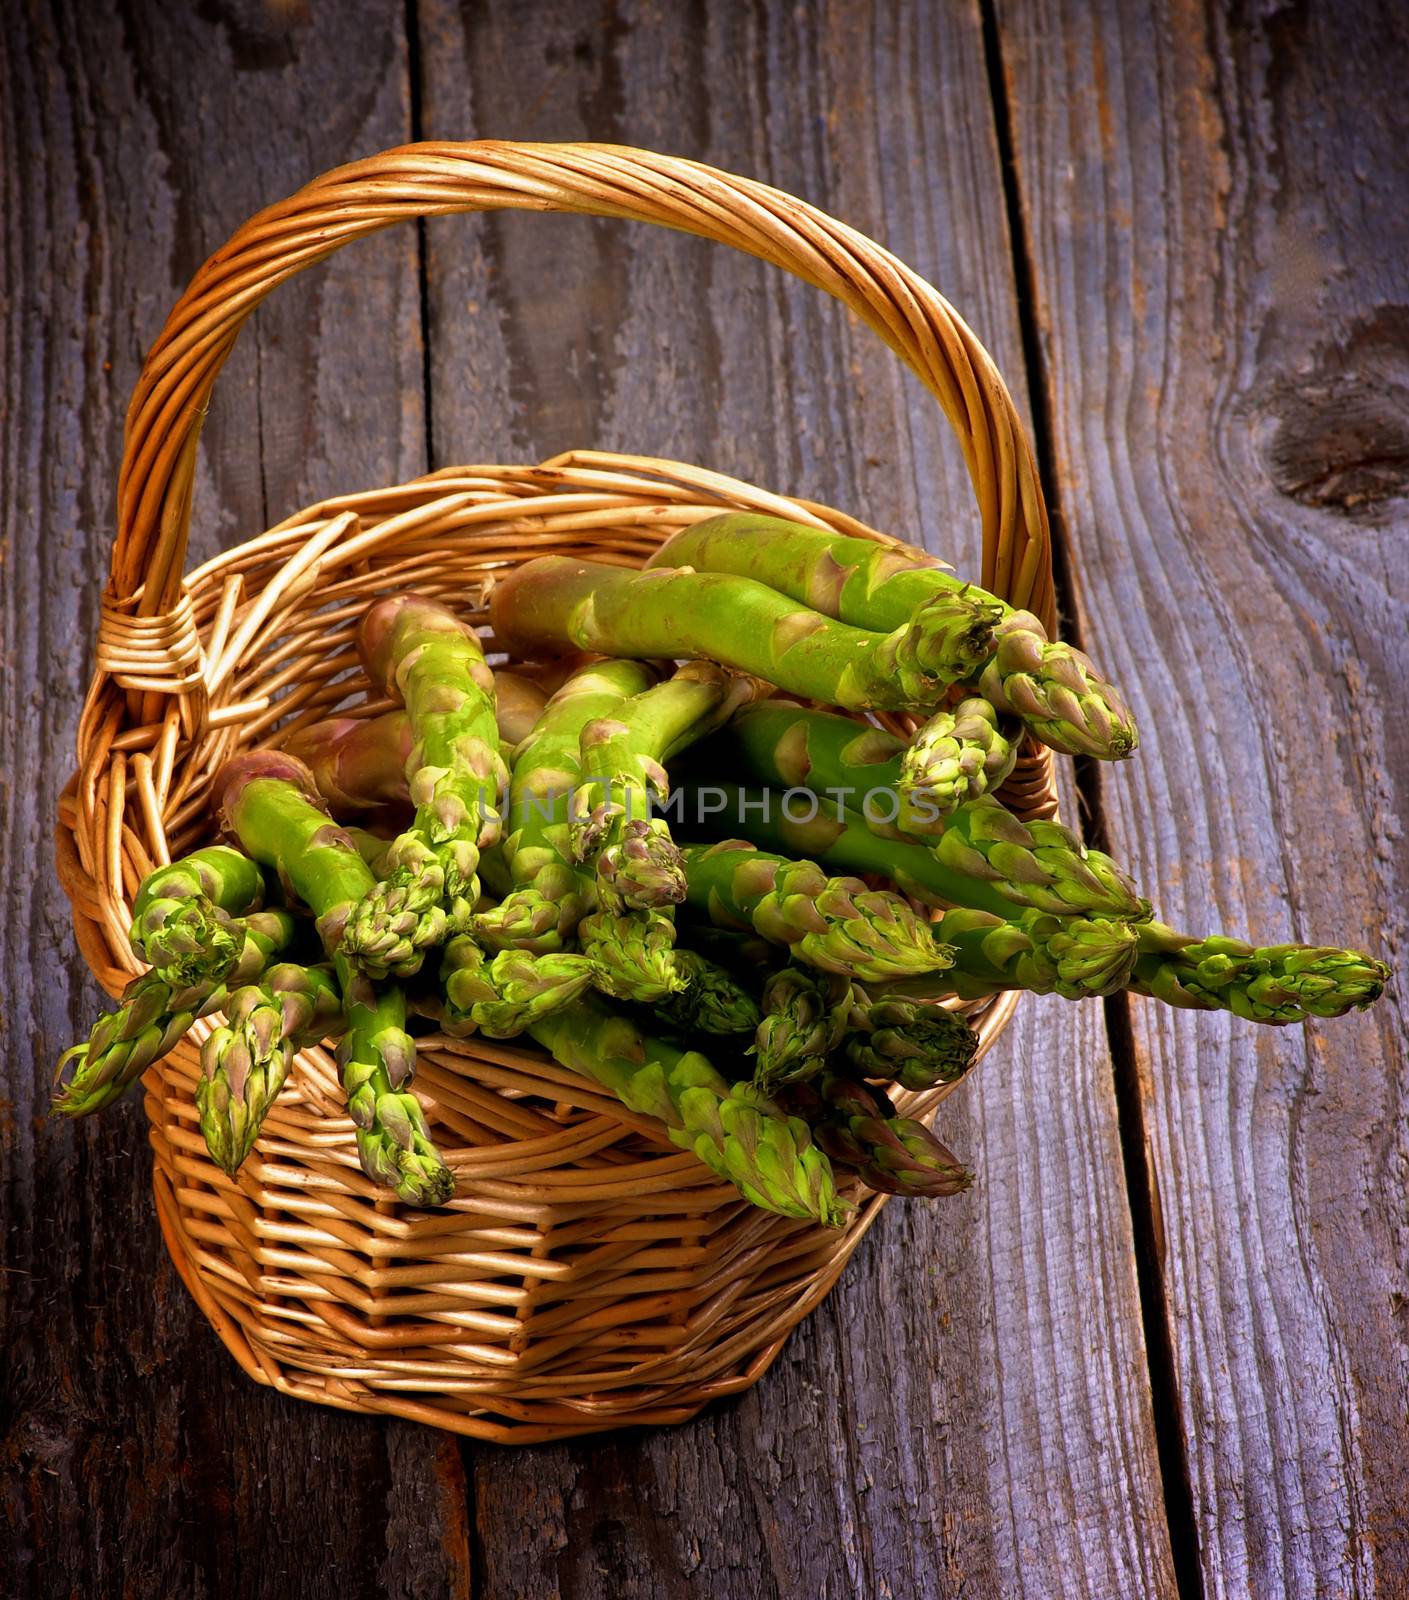 Asparagus Sprouts by zhekos